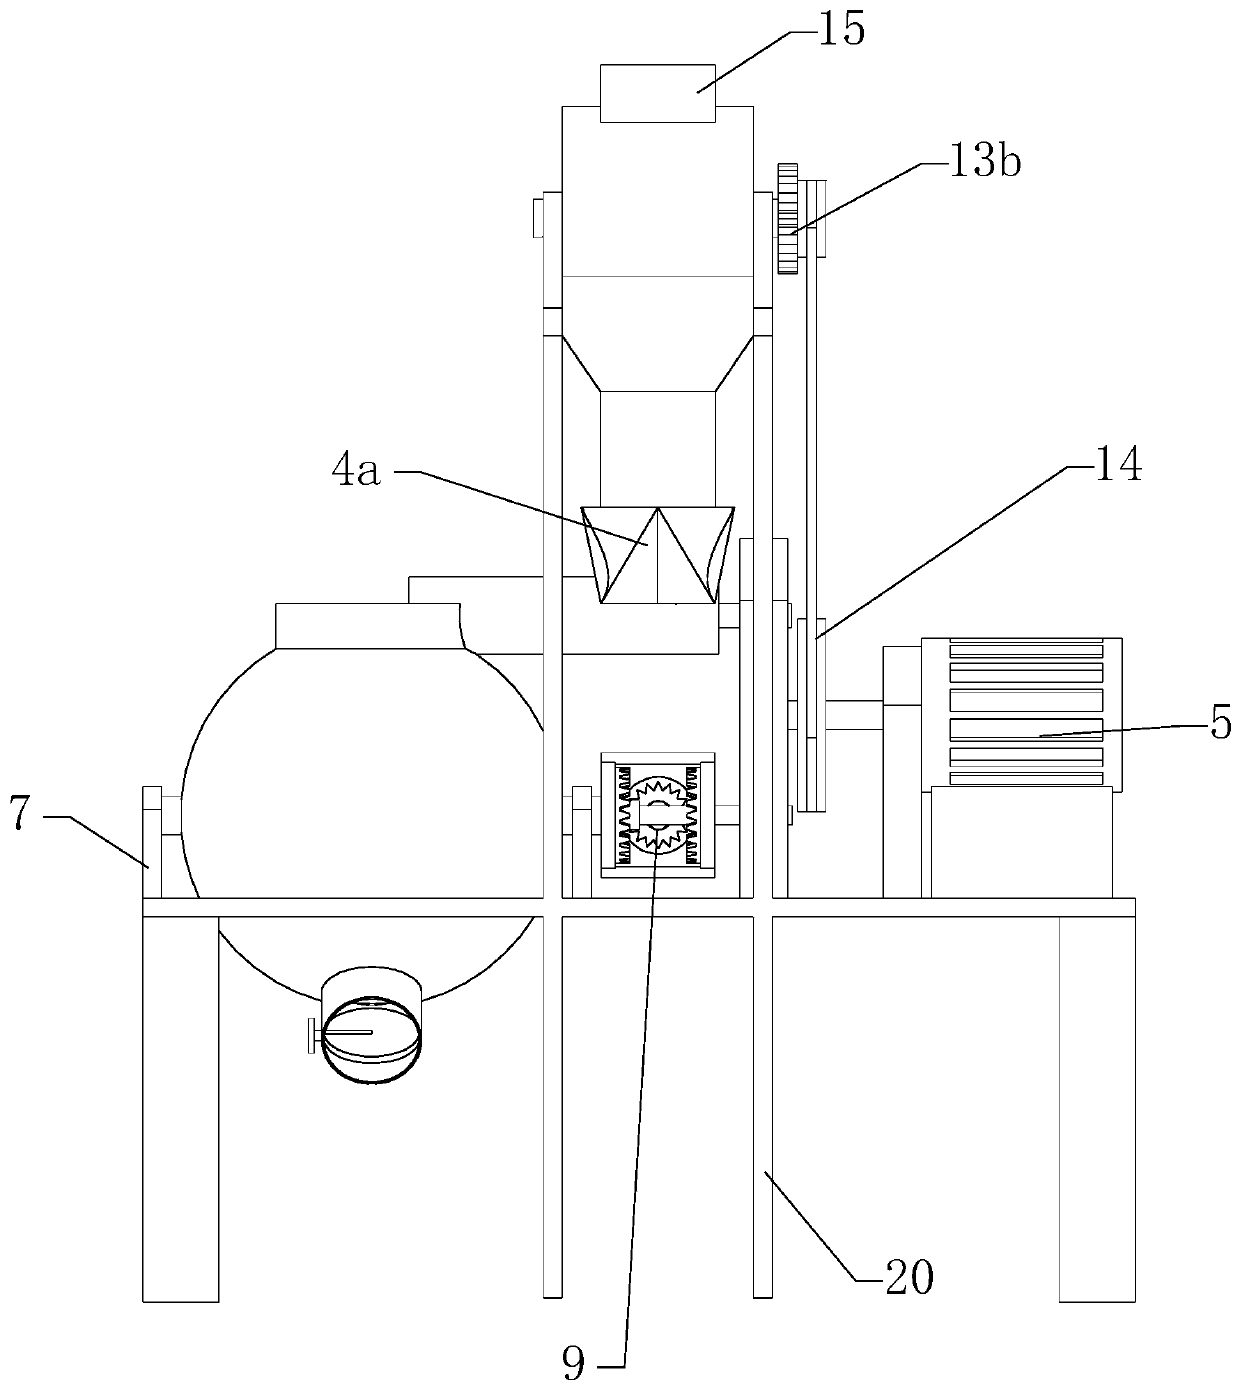 Mixing and stirring device for compound feed used for geese